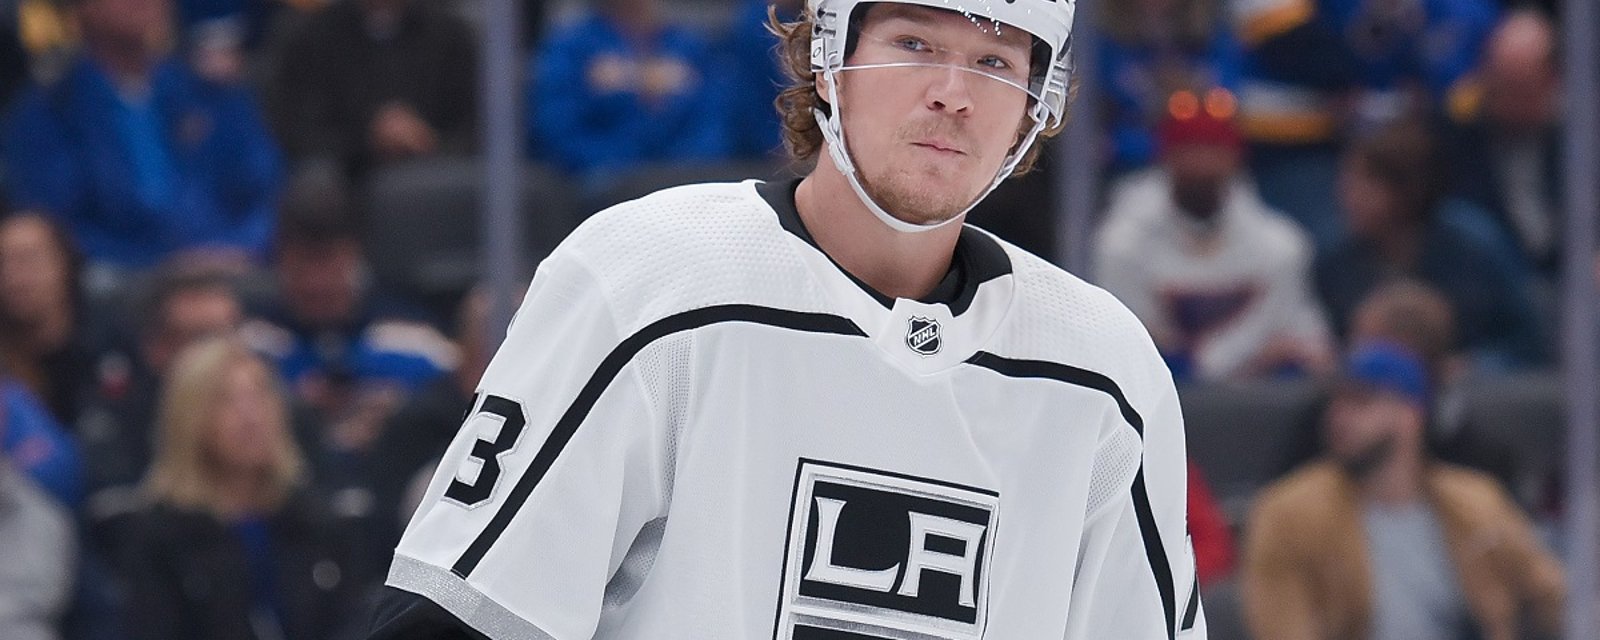 Tyler Toffoli has signed with the Habs!